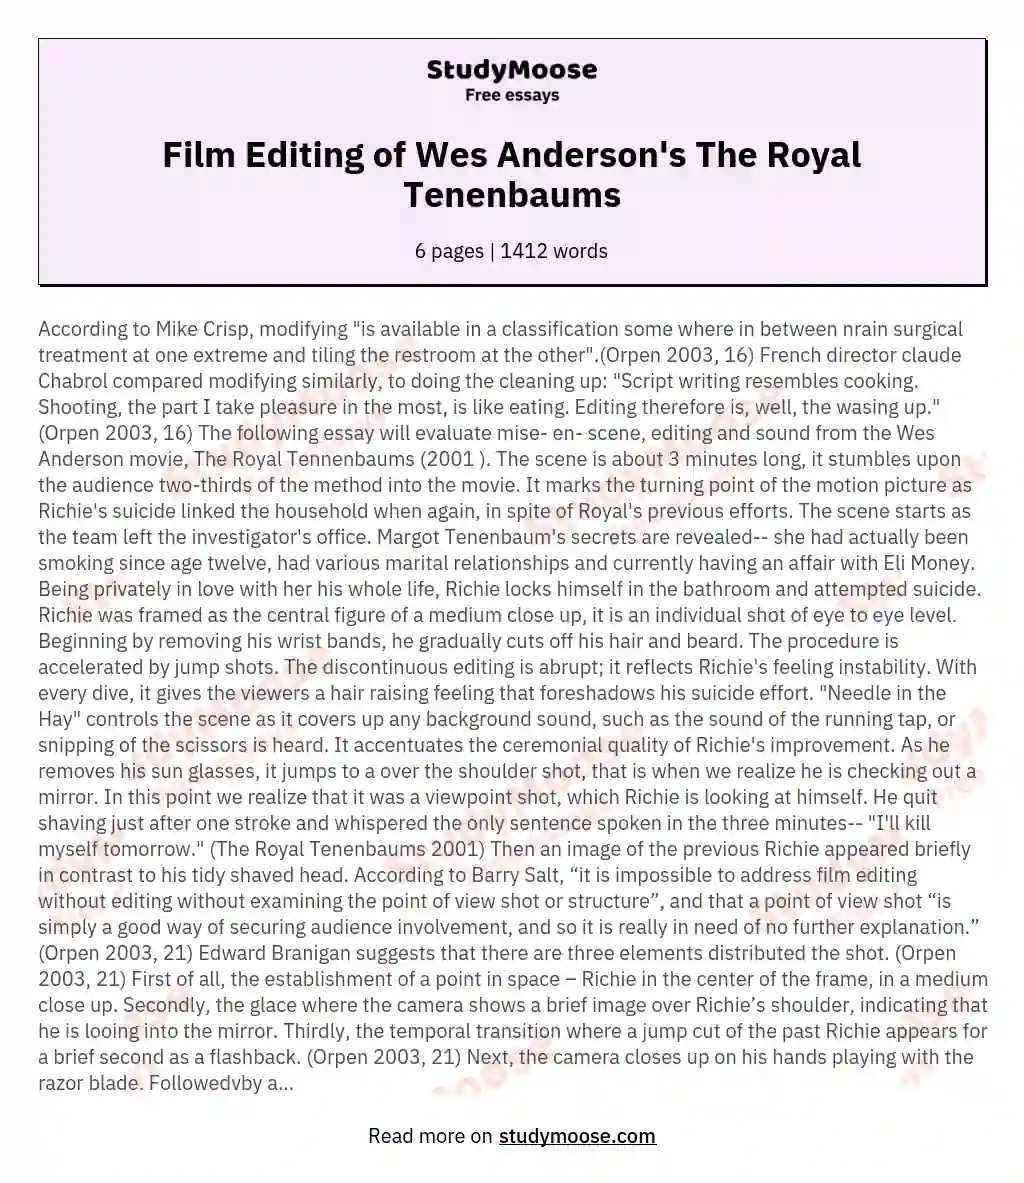 Film Editing of Wes Anderson's The Royal Tenenbaums essay